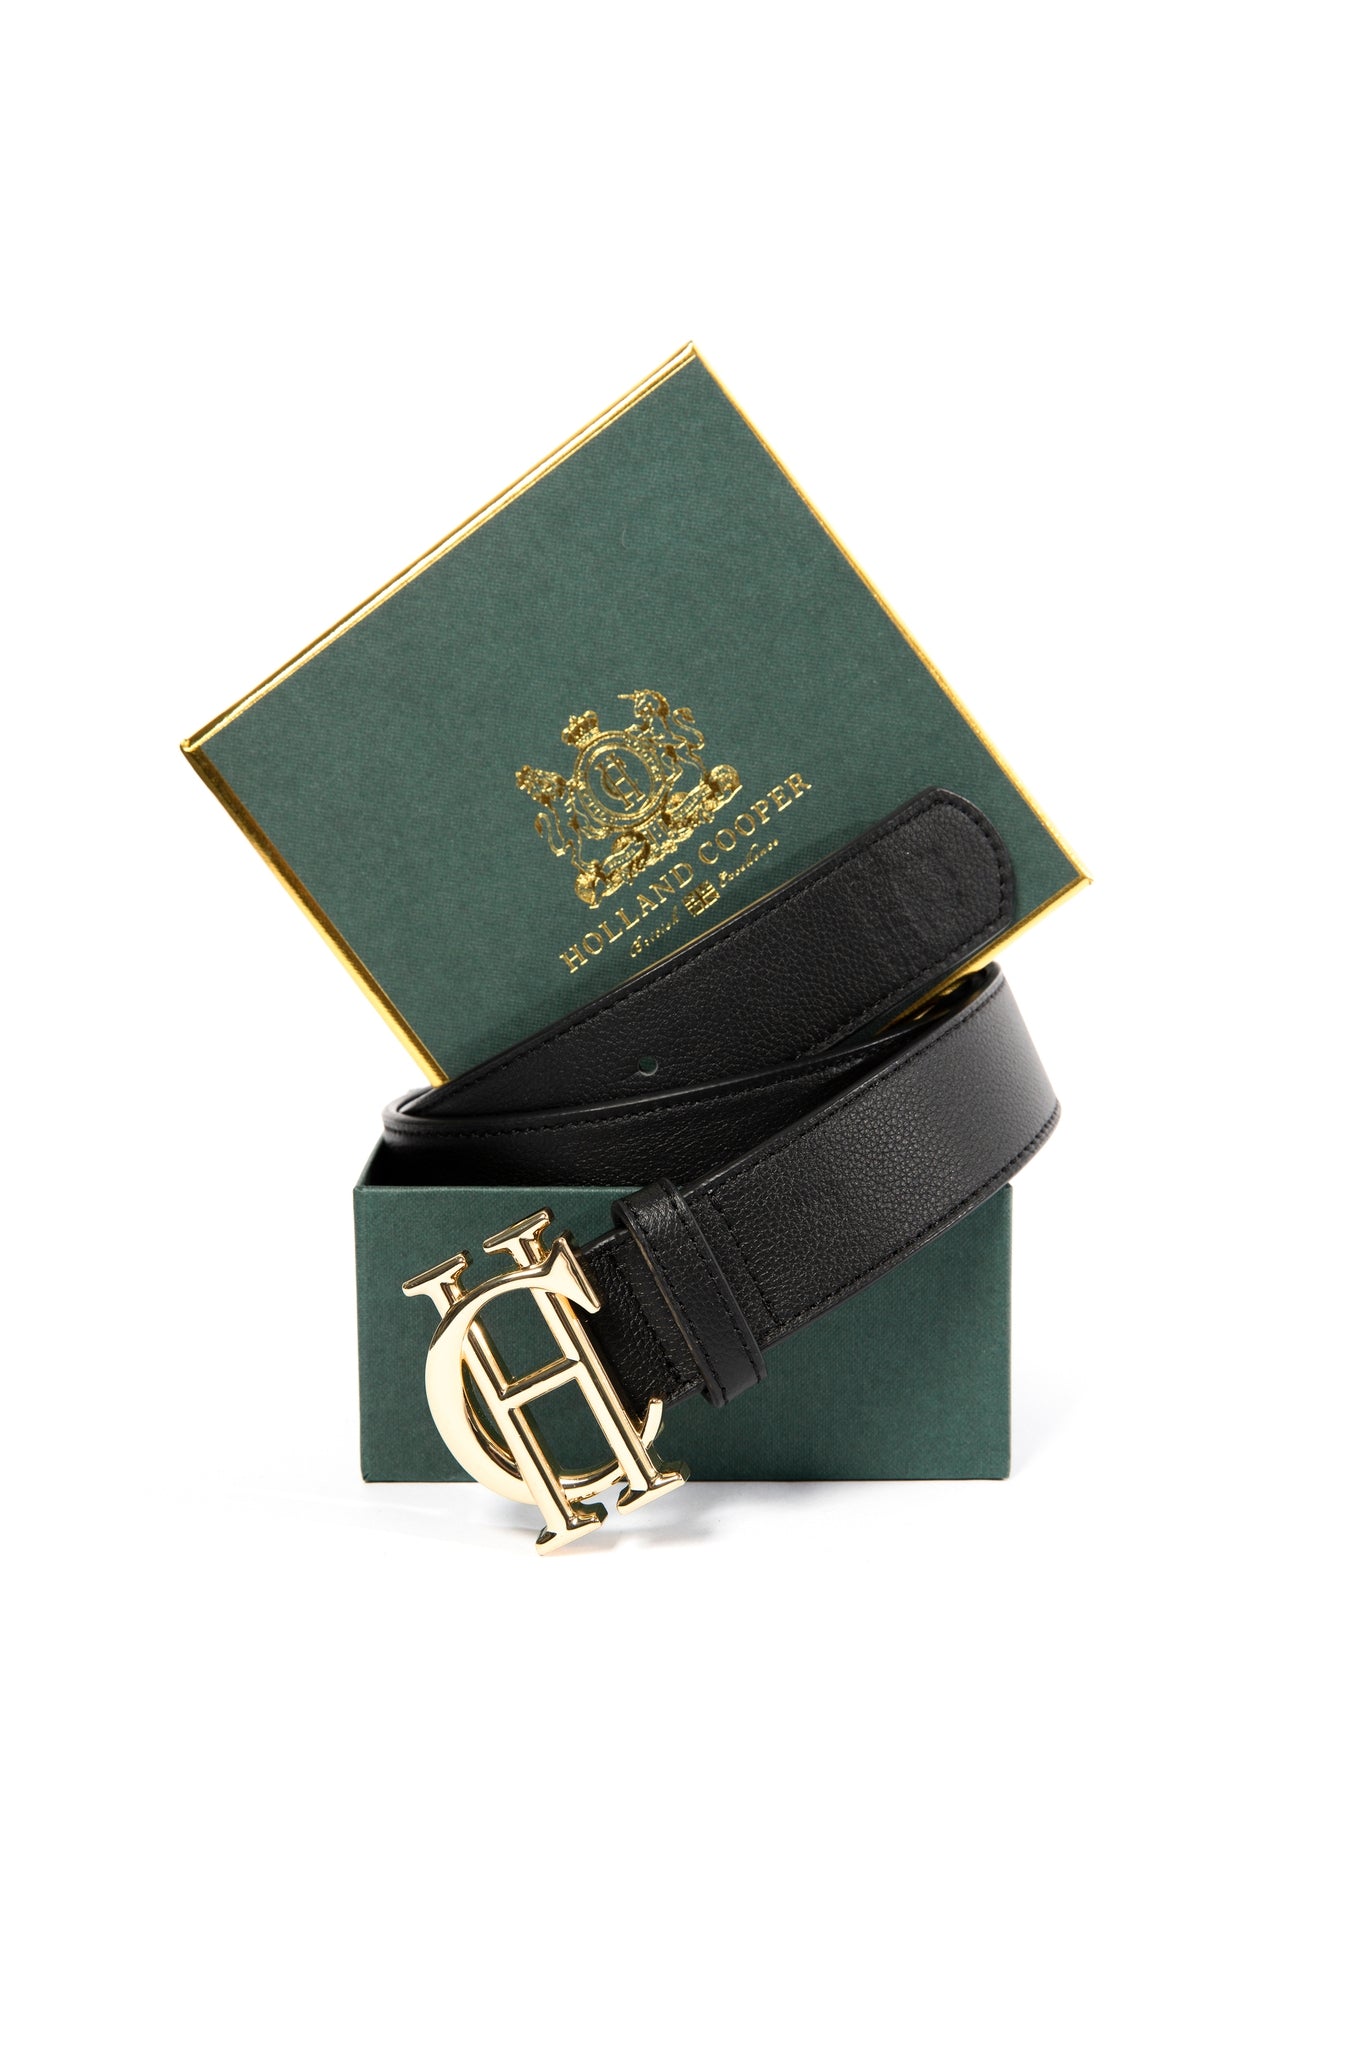 Holland Cooper Classic Ladies Belt in Black and Gold